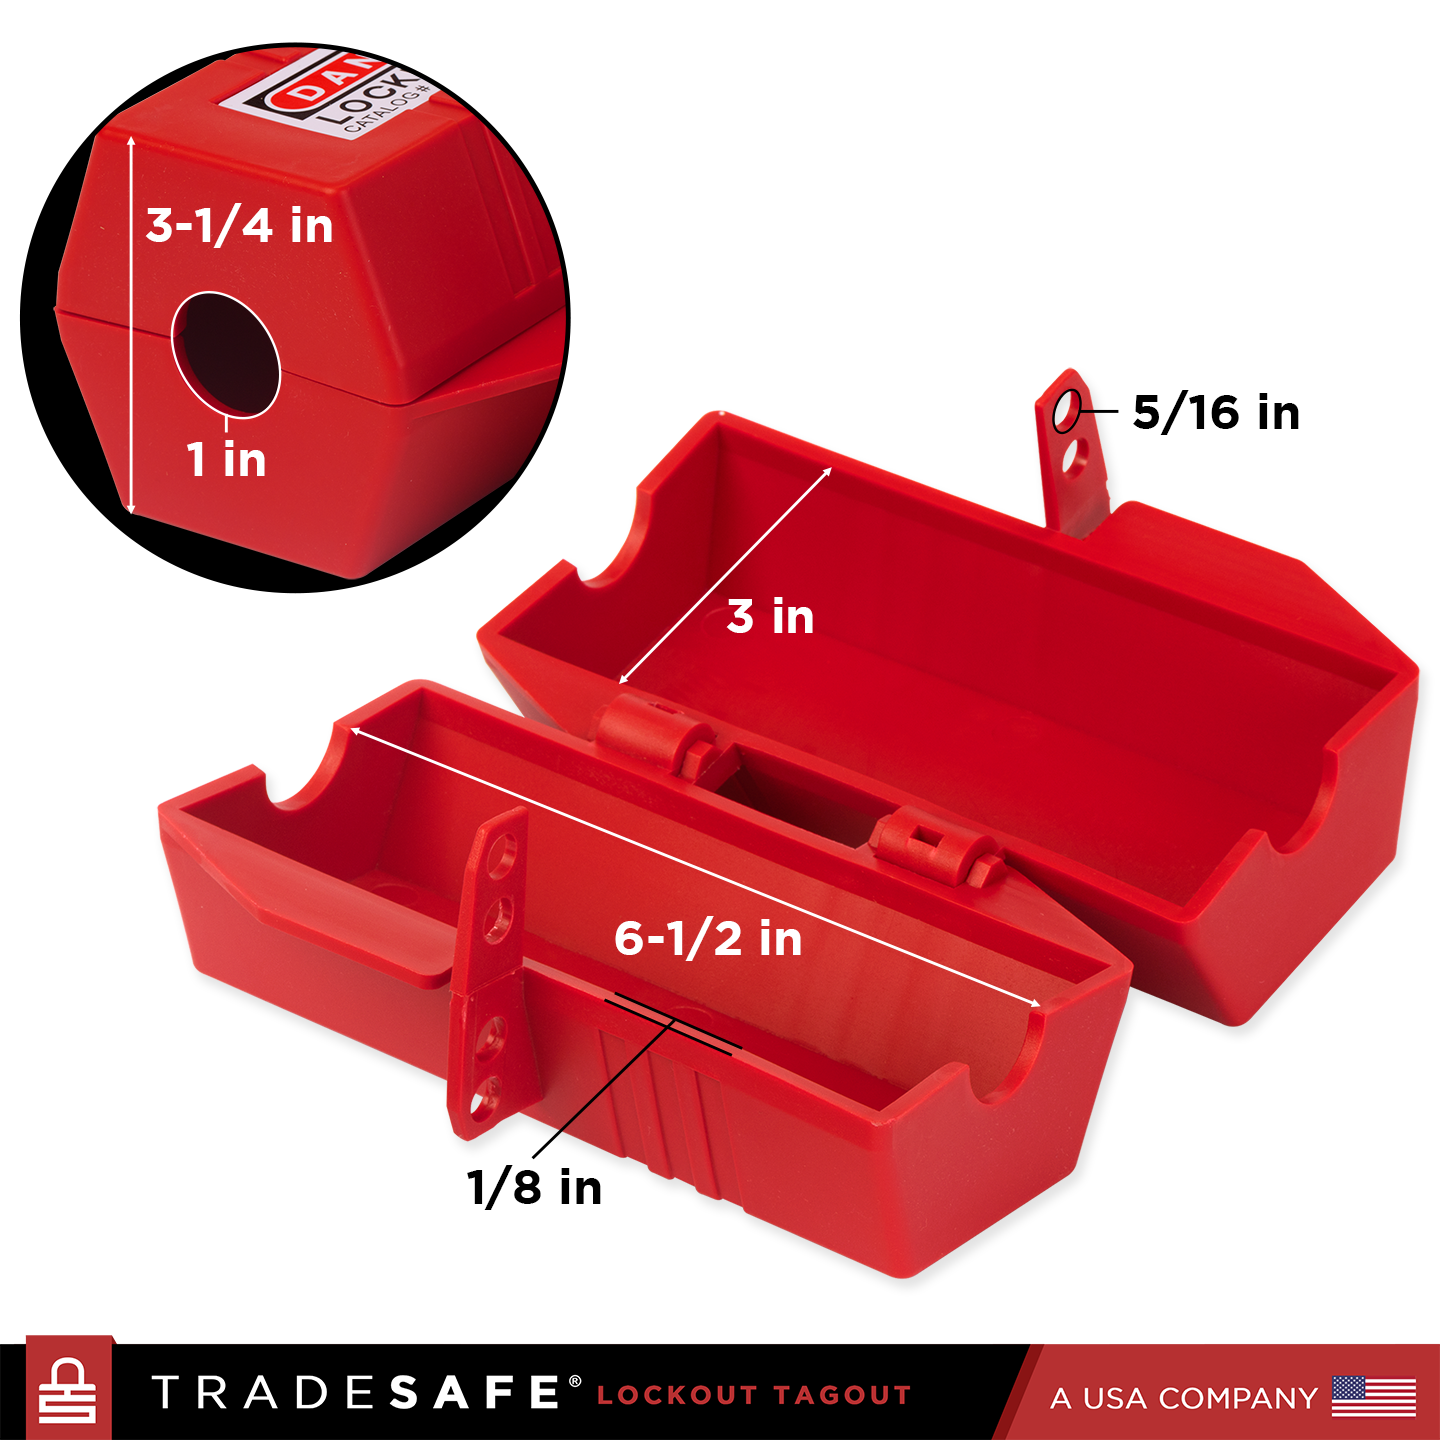 red plug lockout with dimensions